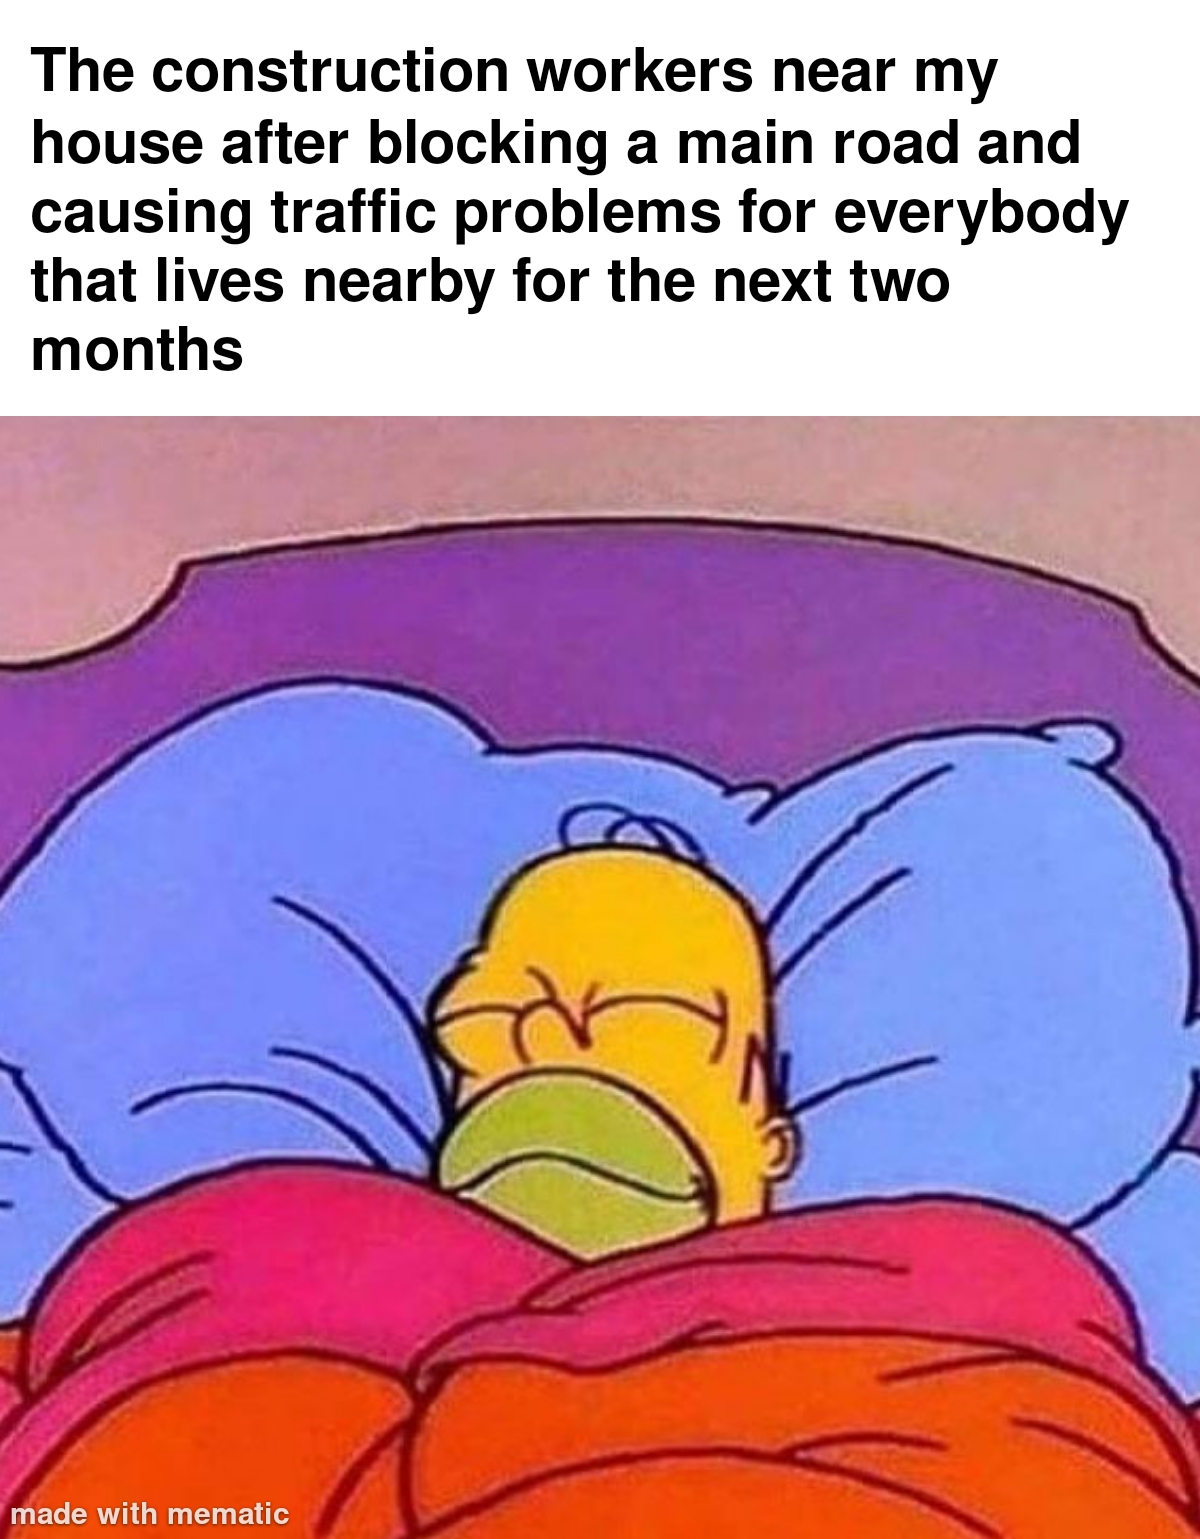 dank memes - me sleeping peacefully knowing - The construction workers near my house after blocking a main road and causing traffic problems for everybody that lives nearby for the next two months made with mematic